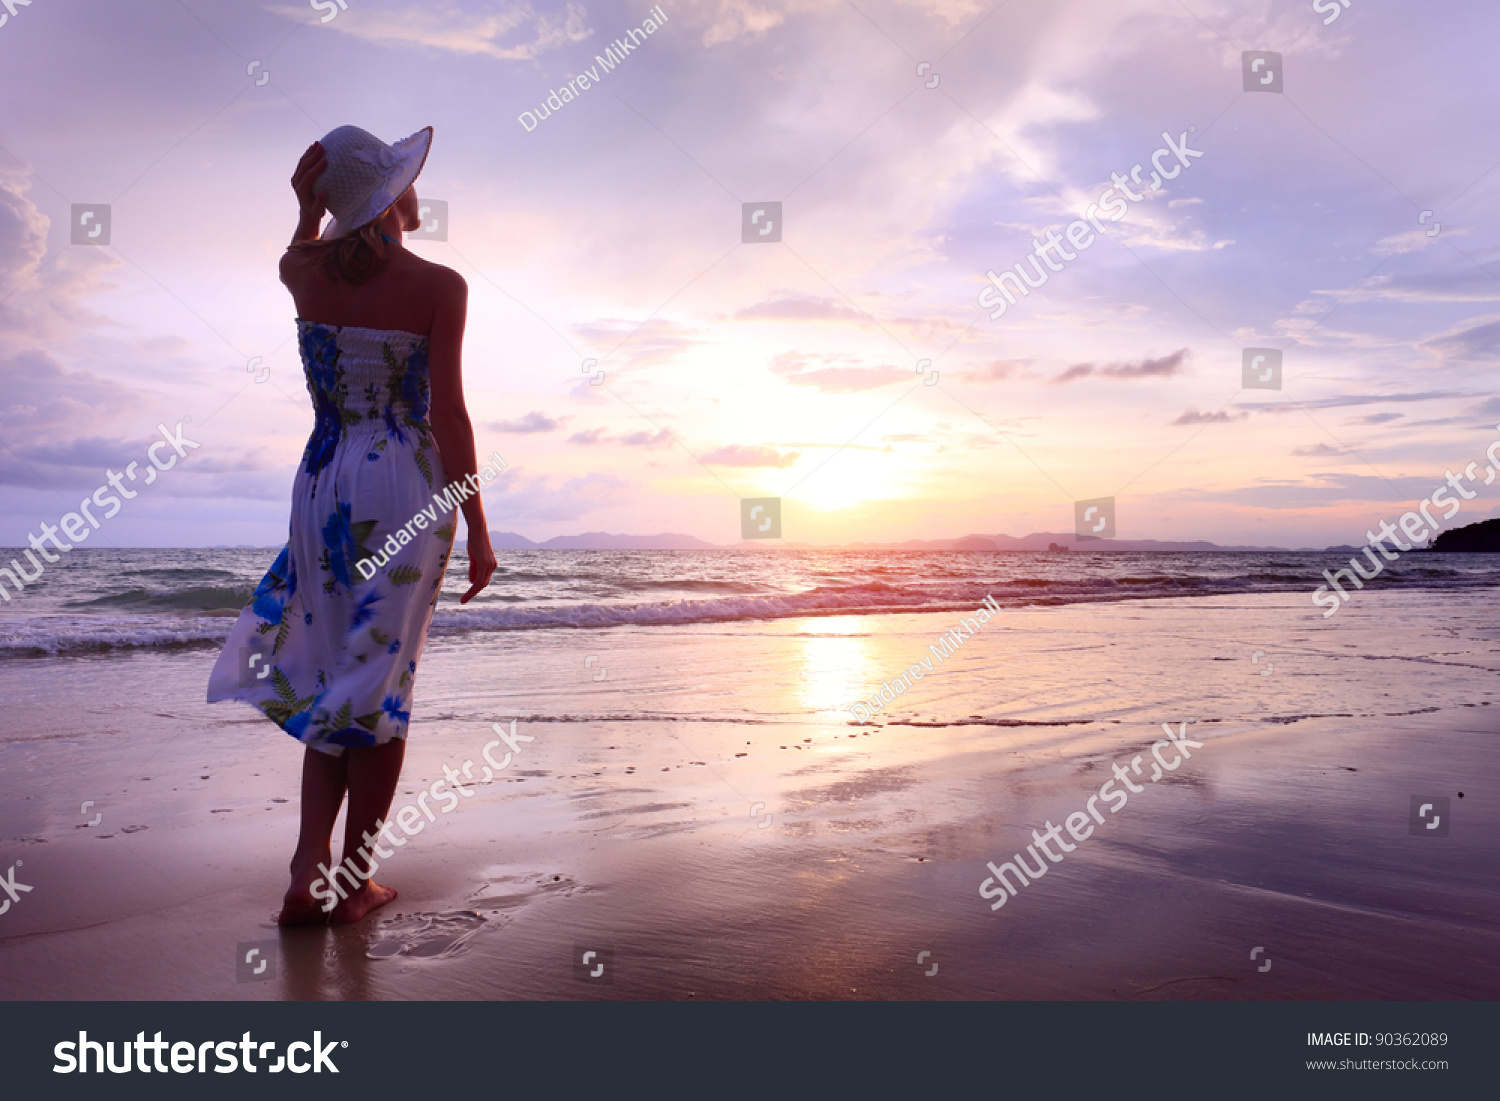 Woman In Summer Dress Standing On A Sandy Beach And Looking To The ...